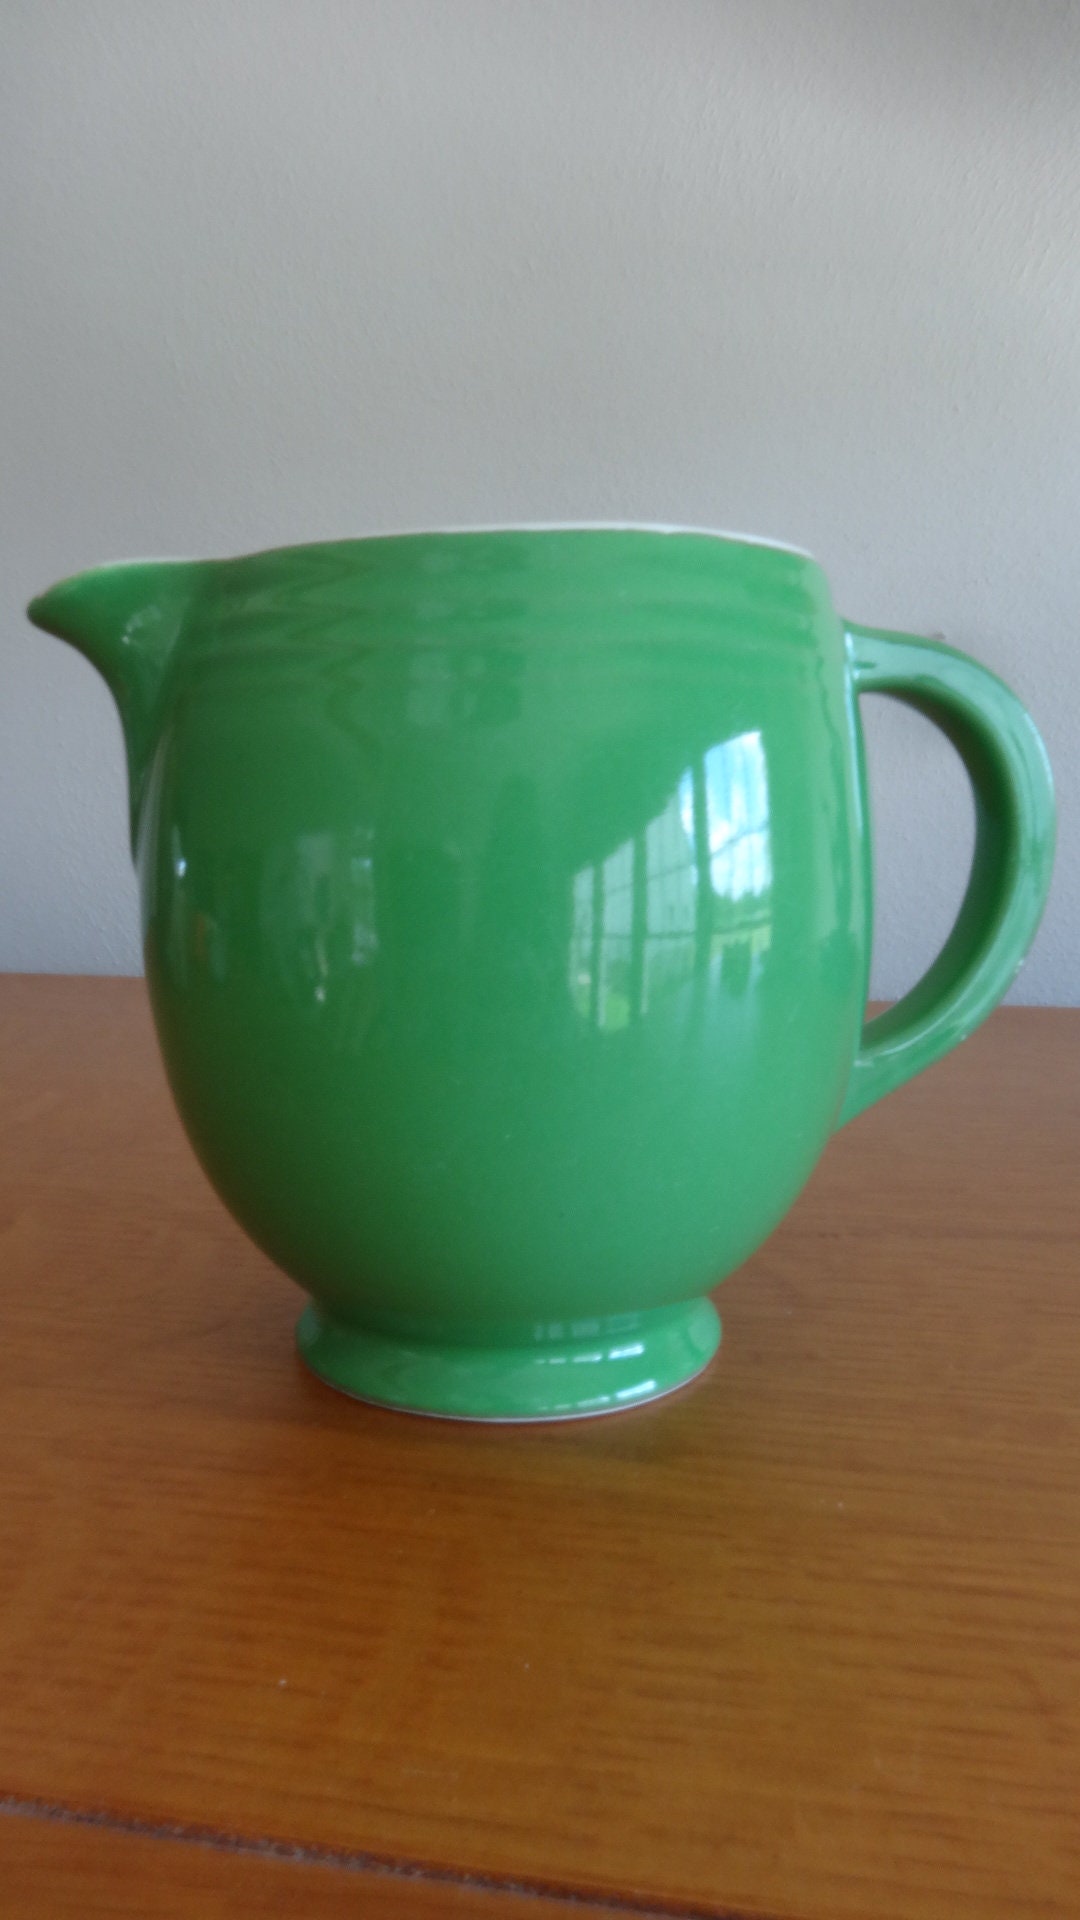 Hall Pottery Vintage Olive Green & White Creamer Pitcher Made in